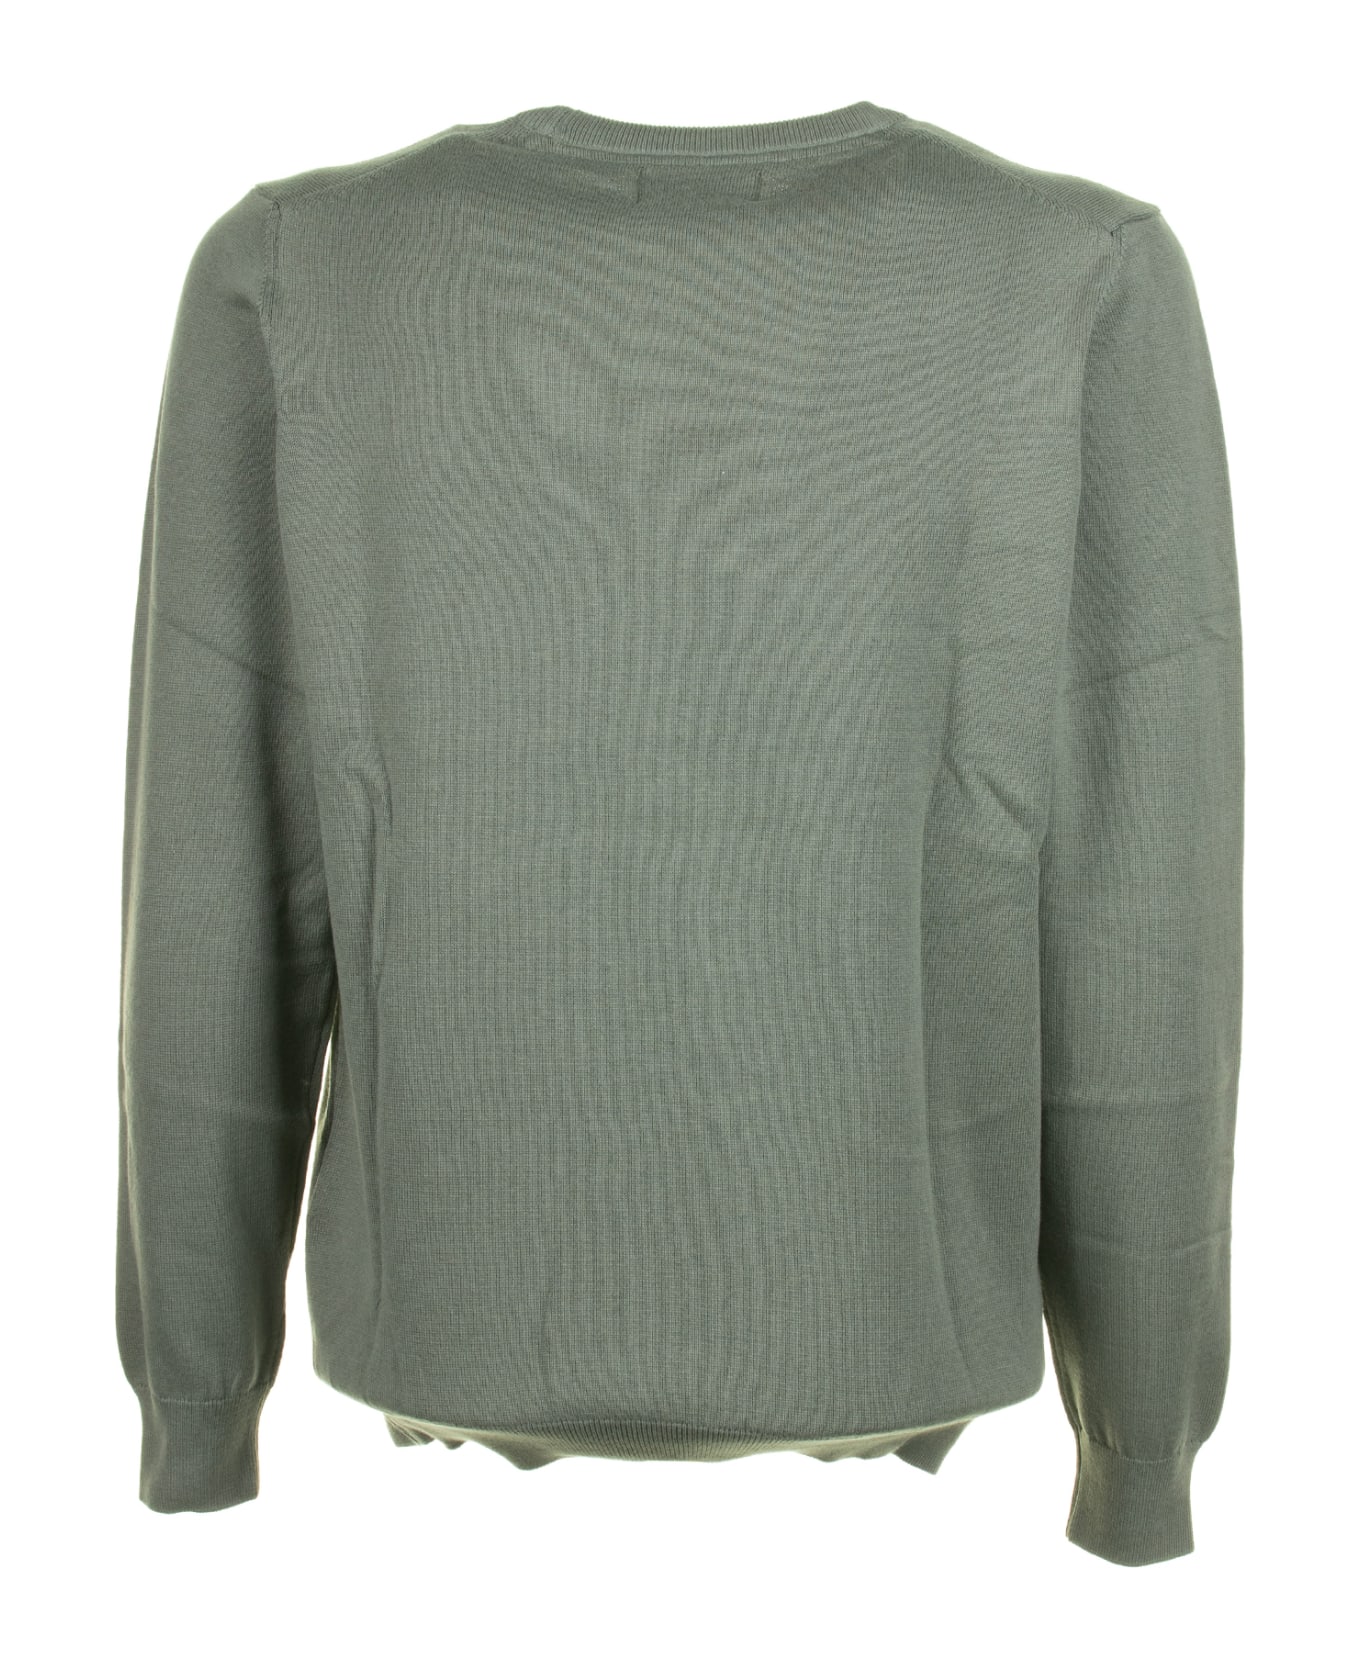 Barbour Green Crew Neck Sweater - AGAVE GREEN